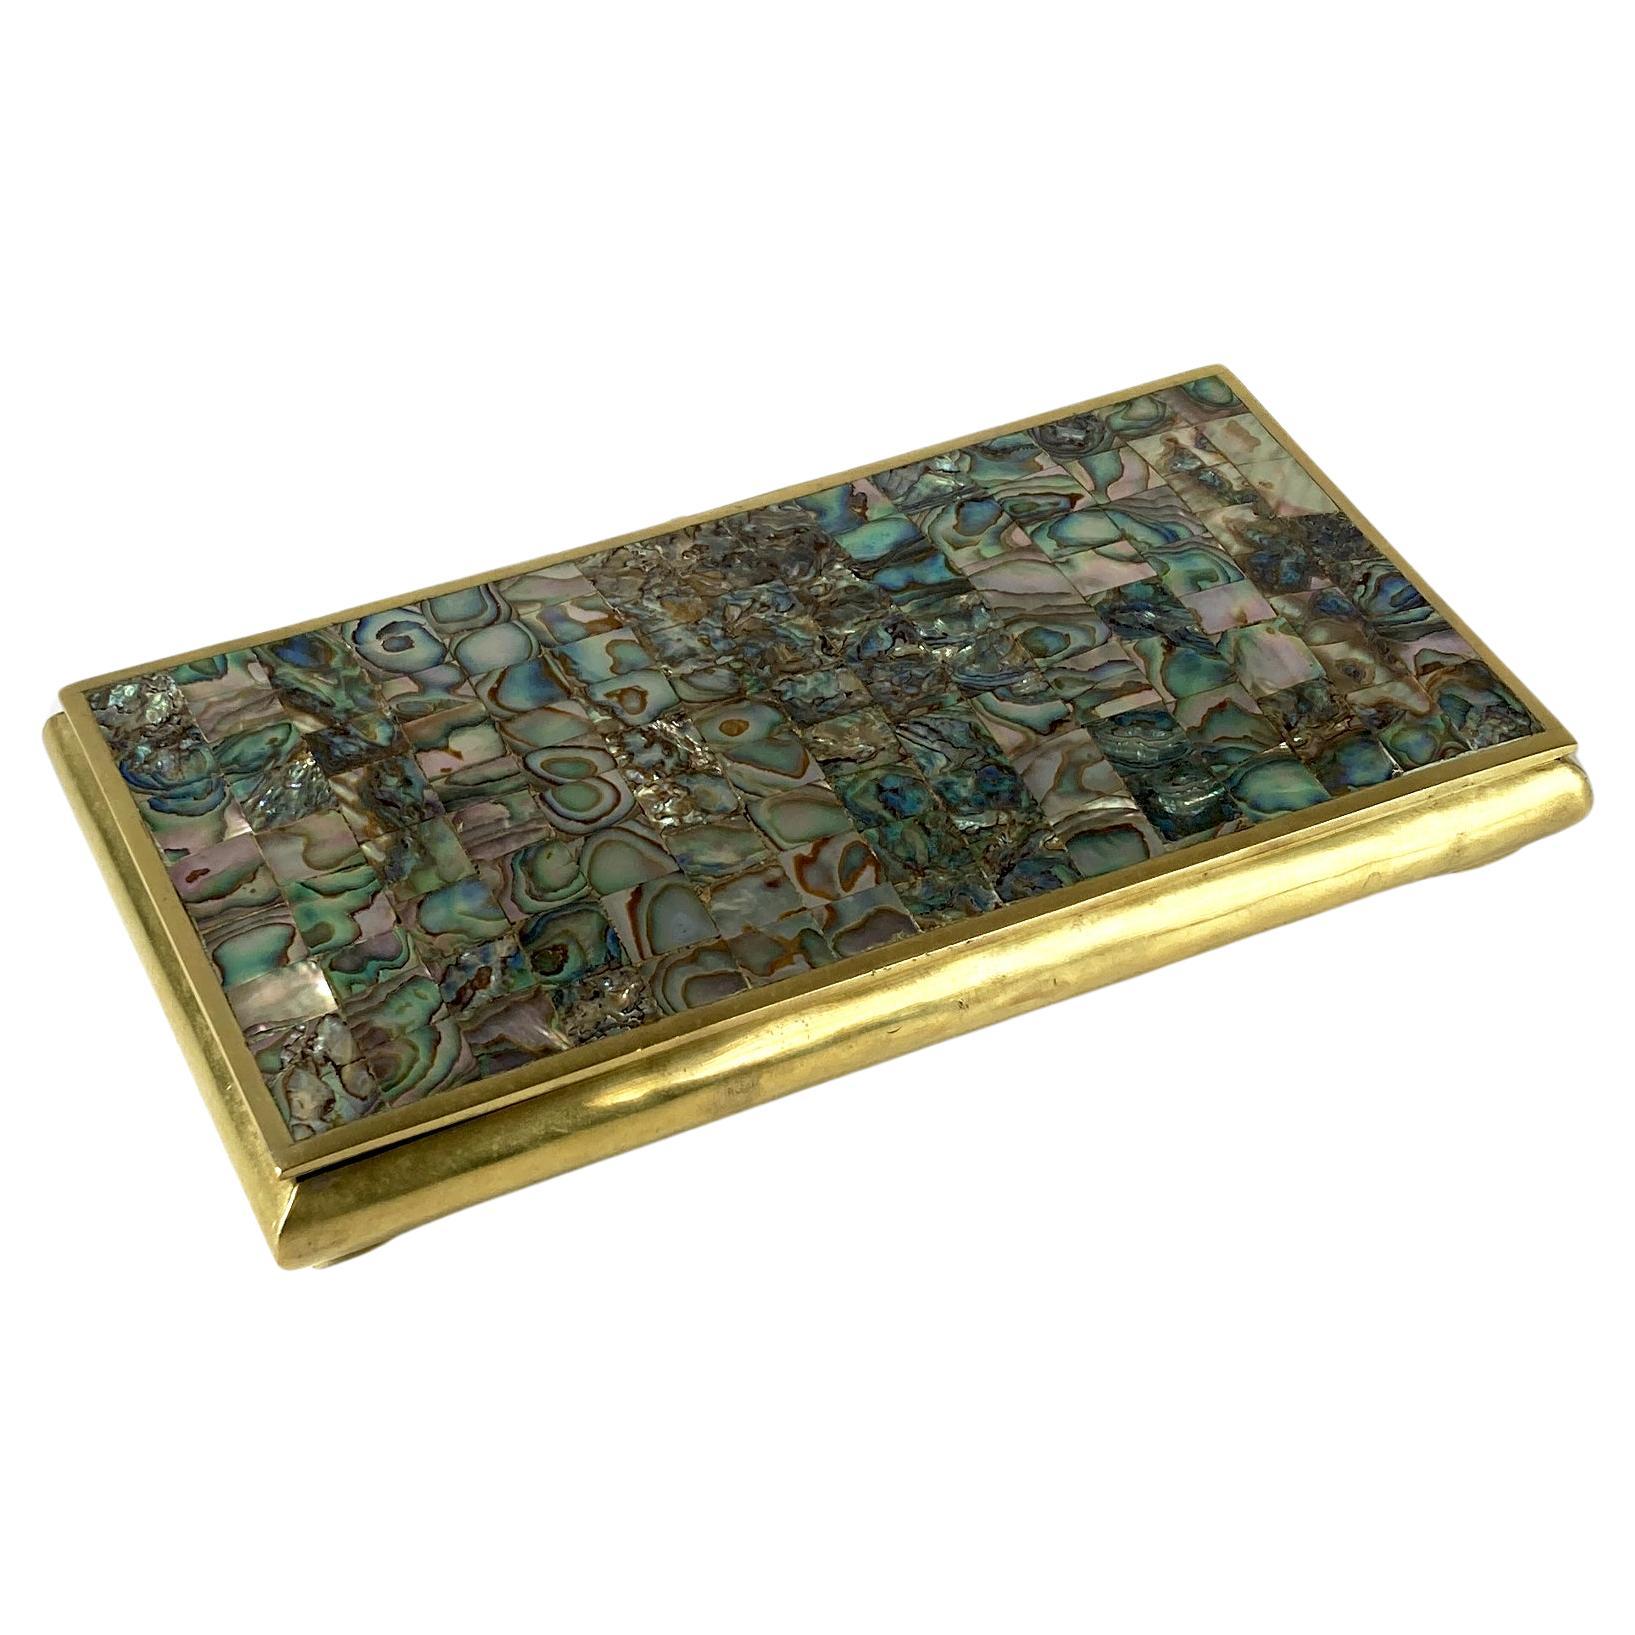 Midcentury Hinged Abalone Shell and Brass Box, Mosaic Pattern on Lid, Wood-lined For Sale